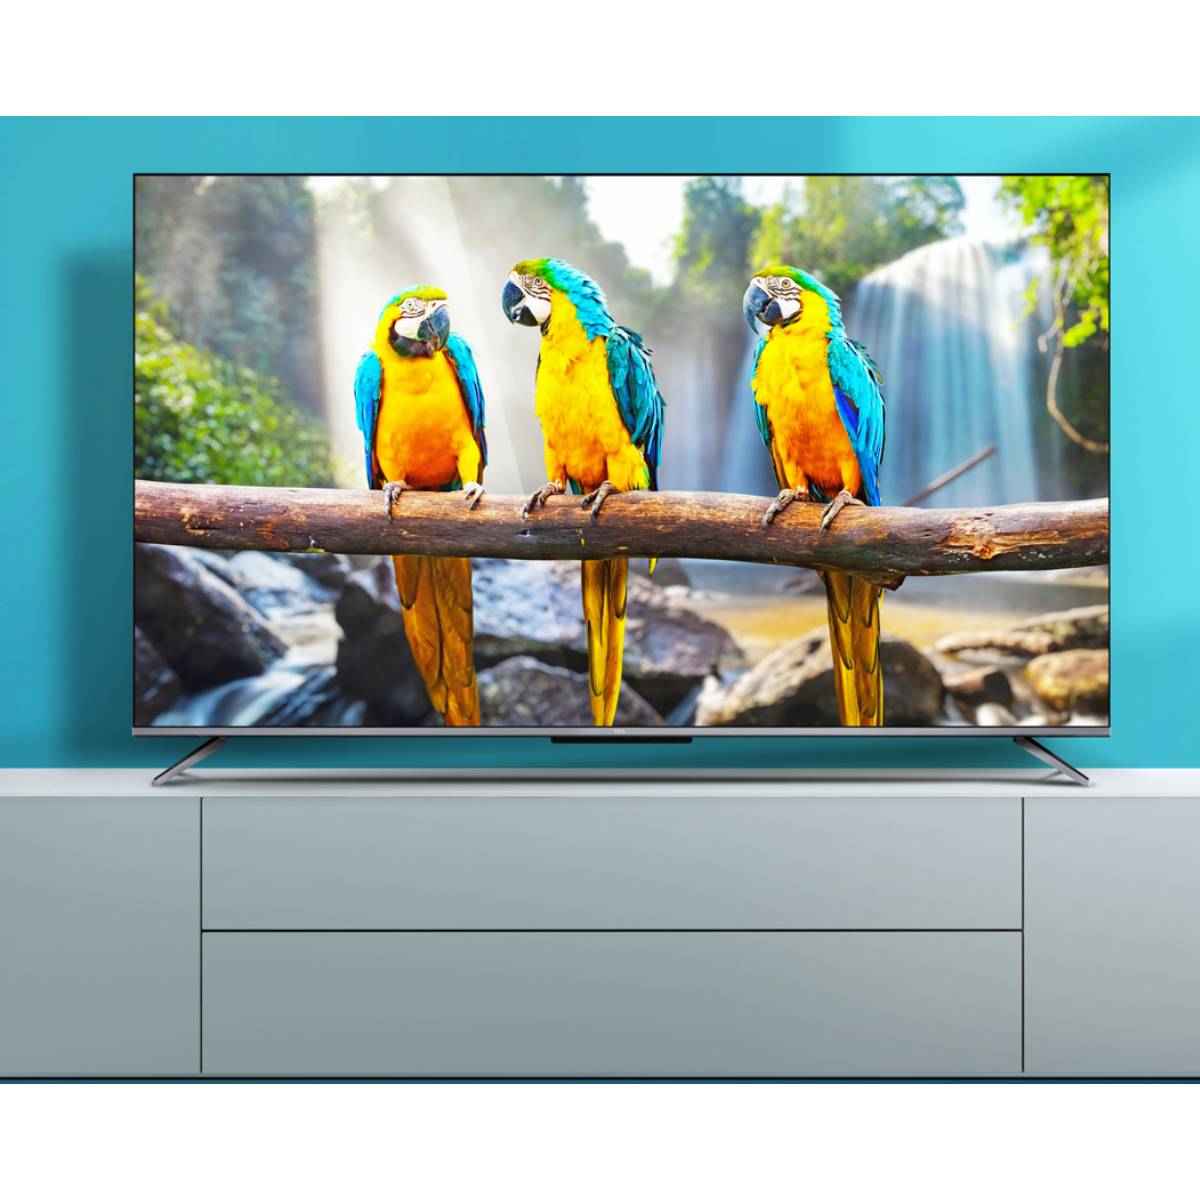 TCL 50 inch 4K HDR Android Smart TV (P715)